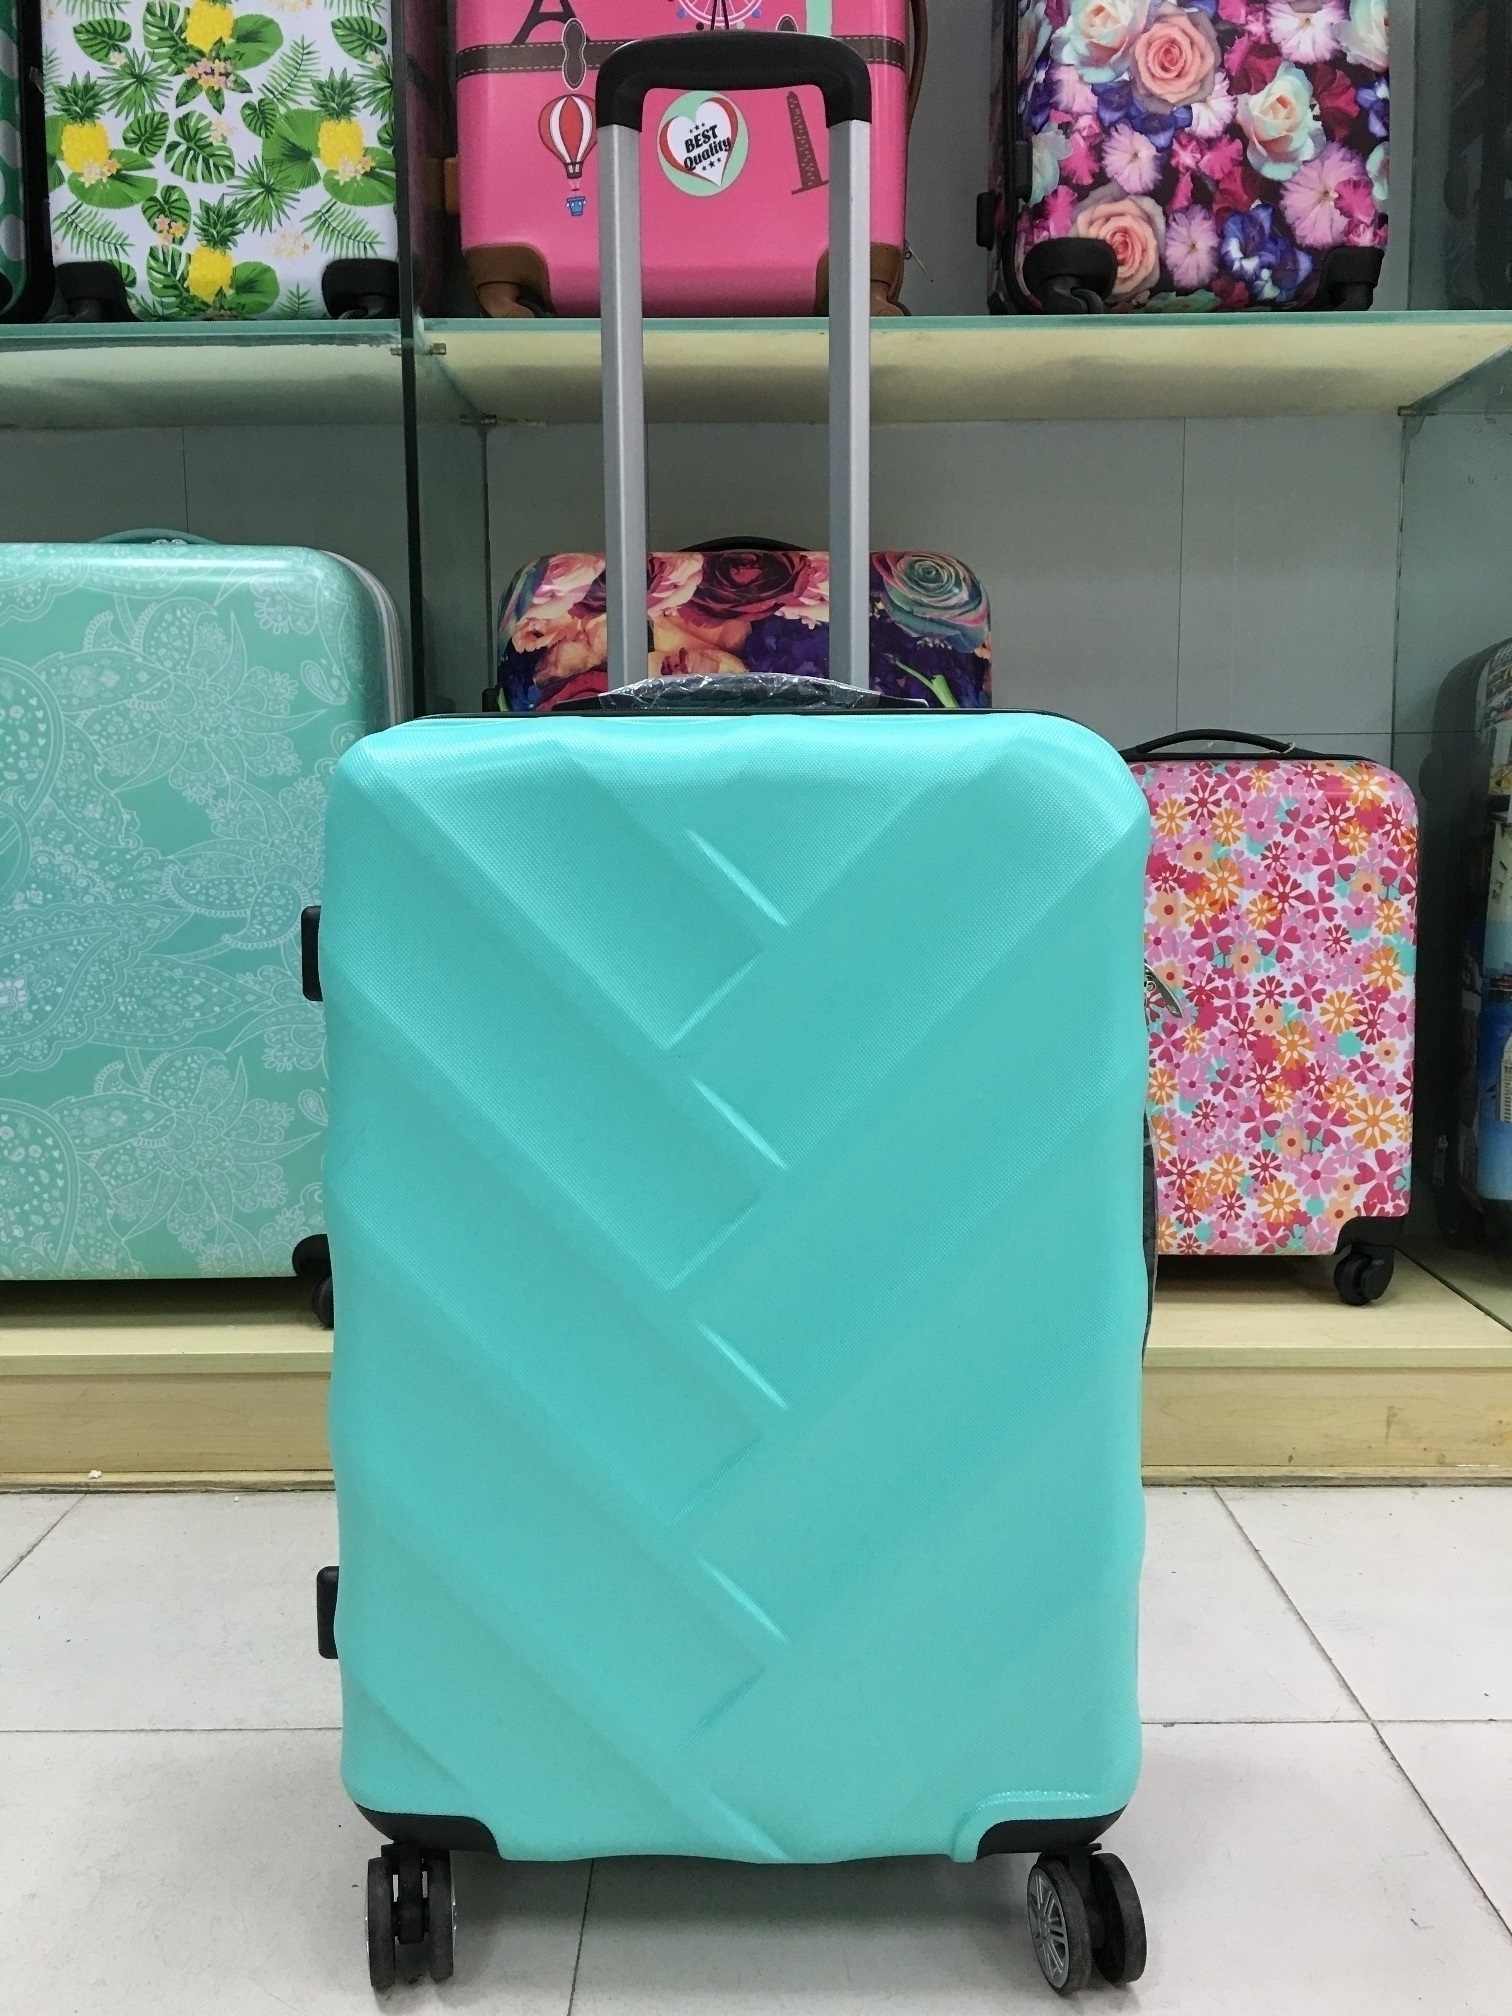 yanteng luggage bags with spectacular design